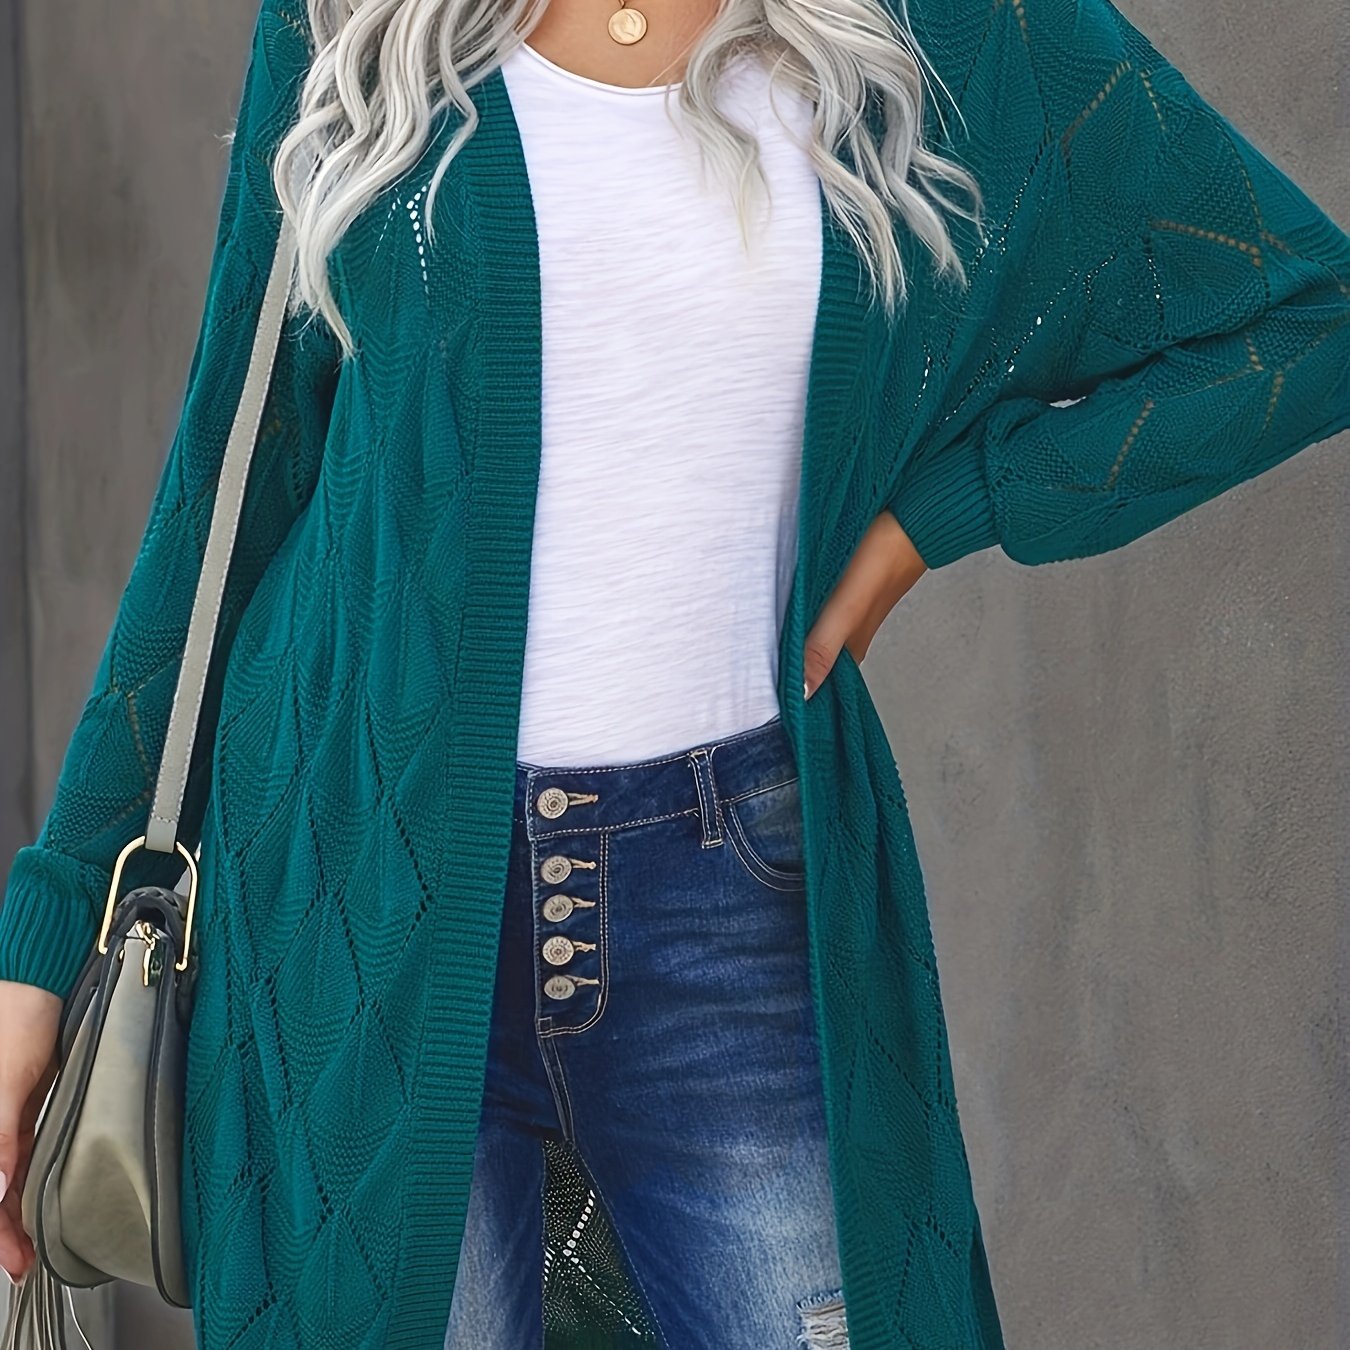 Plus Size Casual Cardigan, Women's Plus Solid Eyelet Embroidered Long Sleeve Open Front Cardigan Green